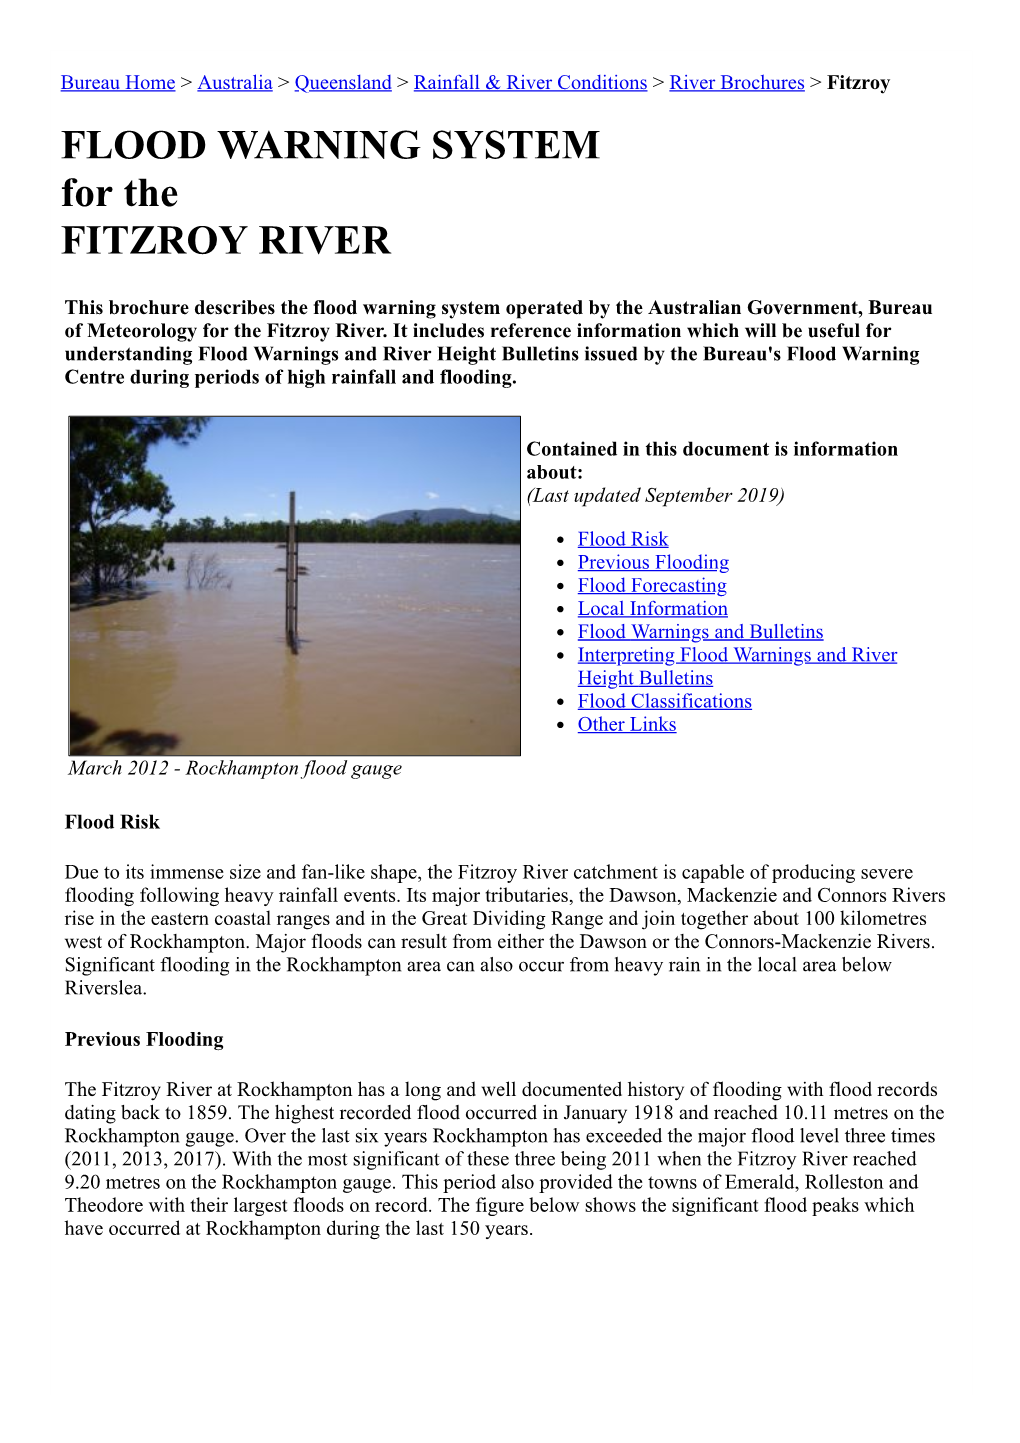 FLOOD WARNING SYSTEM for the FITZROY RIVER